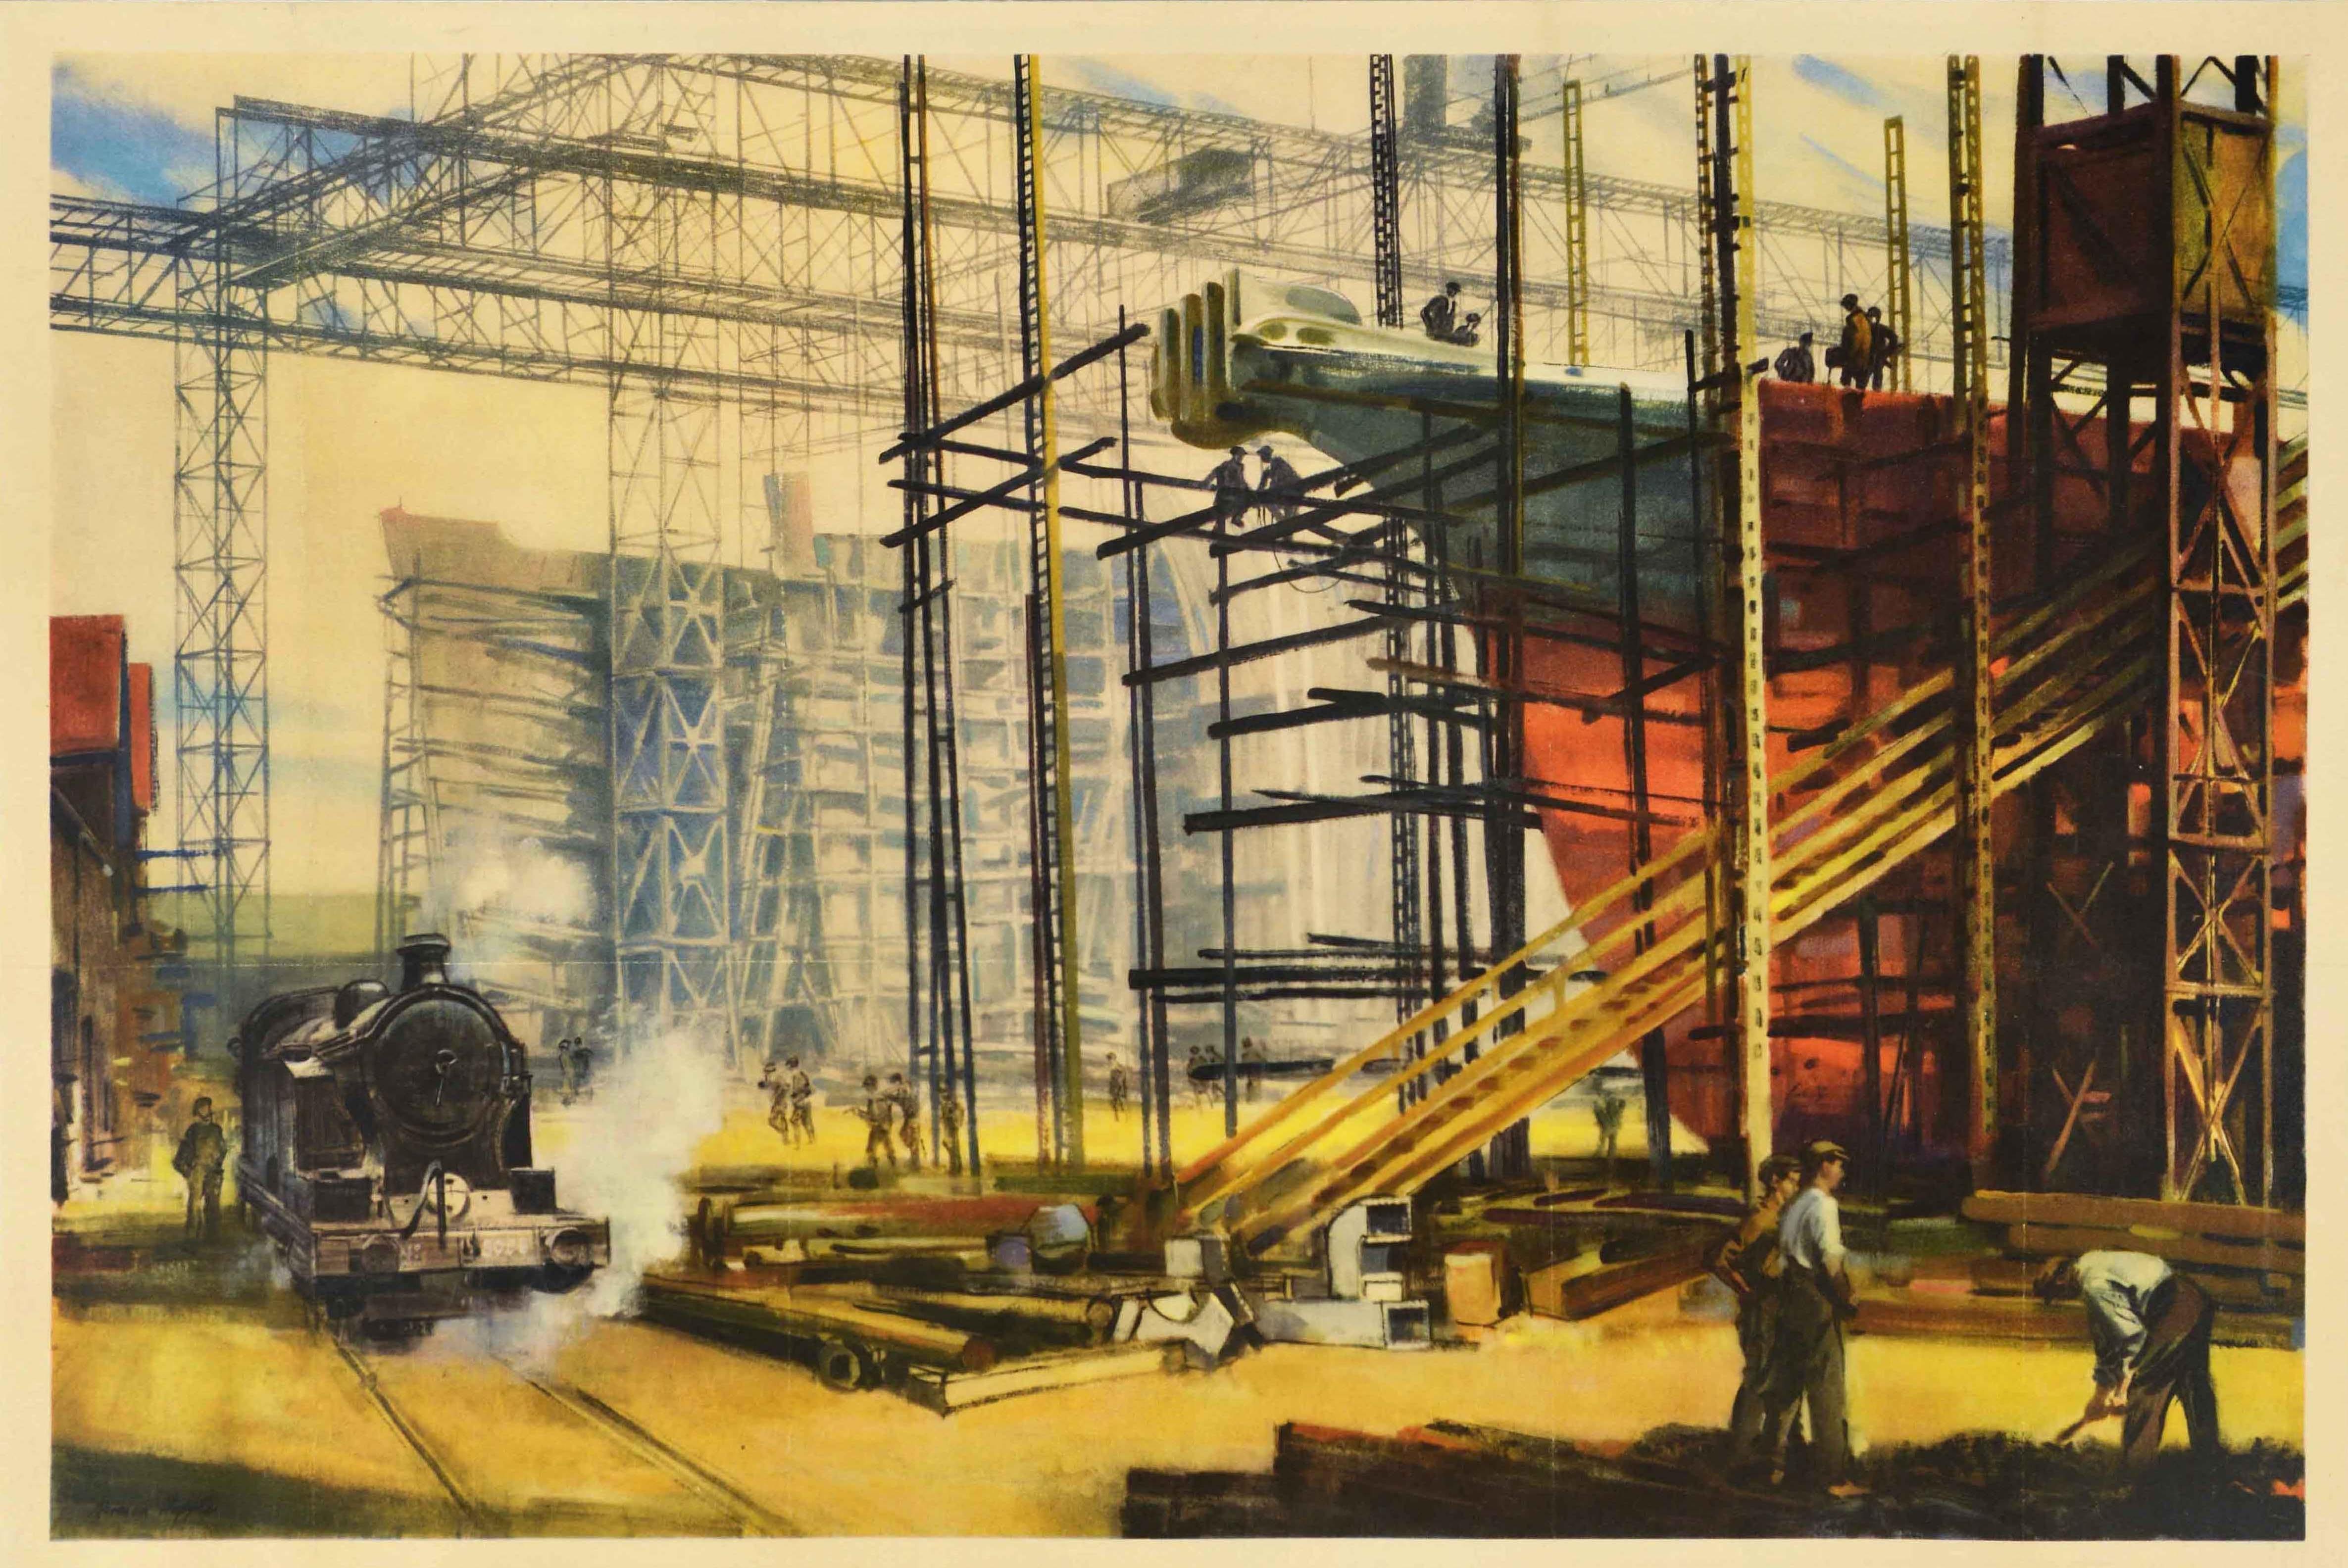 Original vintage British Railways poster - service to industry shipbuilding - featuring industrial artwork by Norman Hepple (1908-1994) showing workers in a busy shipyard with scaffolding over a ship under construction and a steam train on the